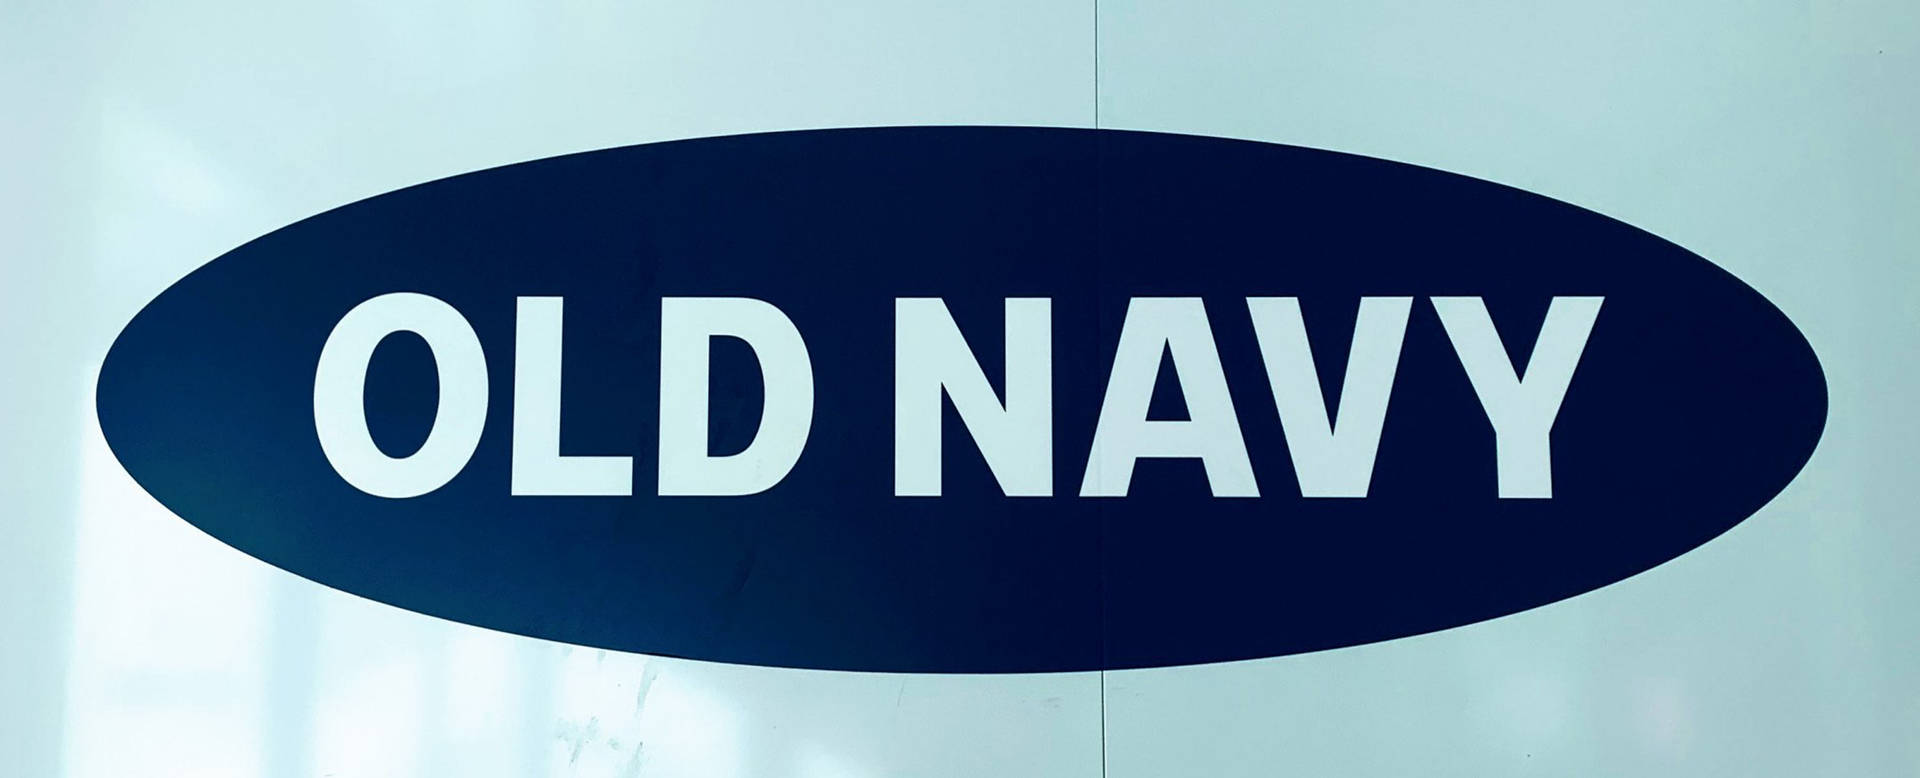 Old Navy Town Square Nevada